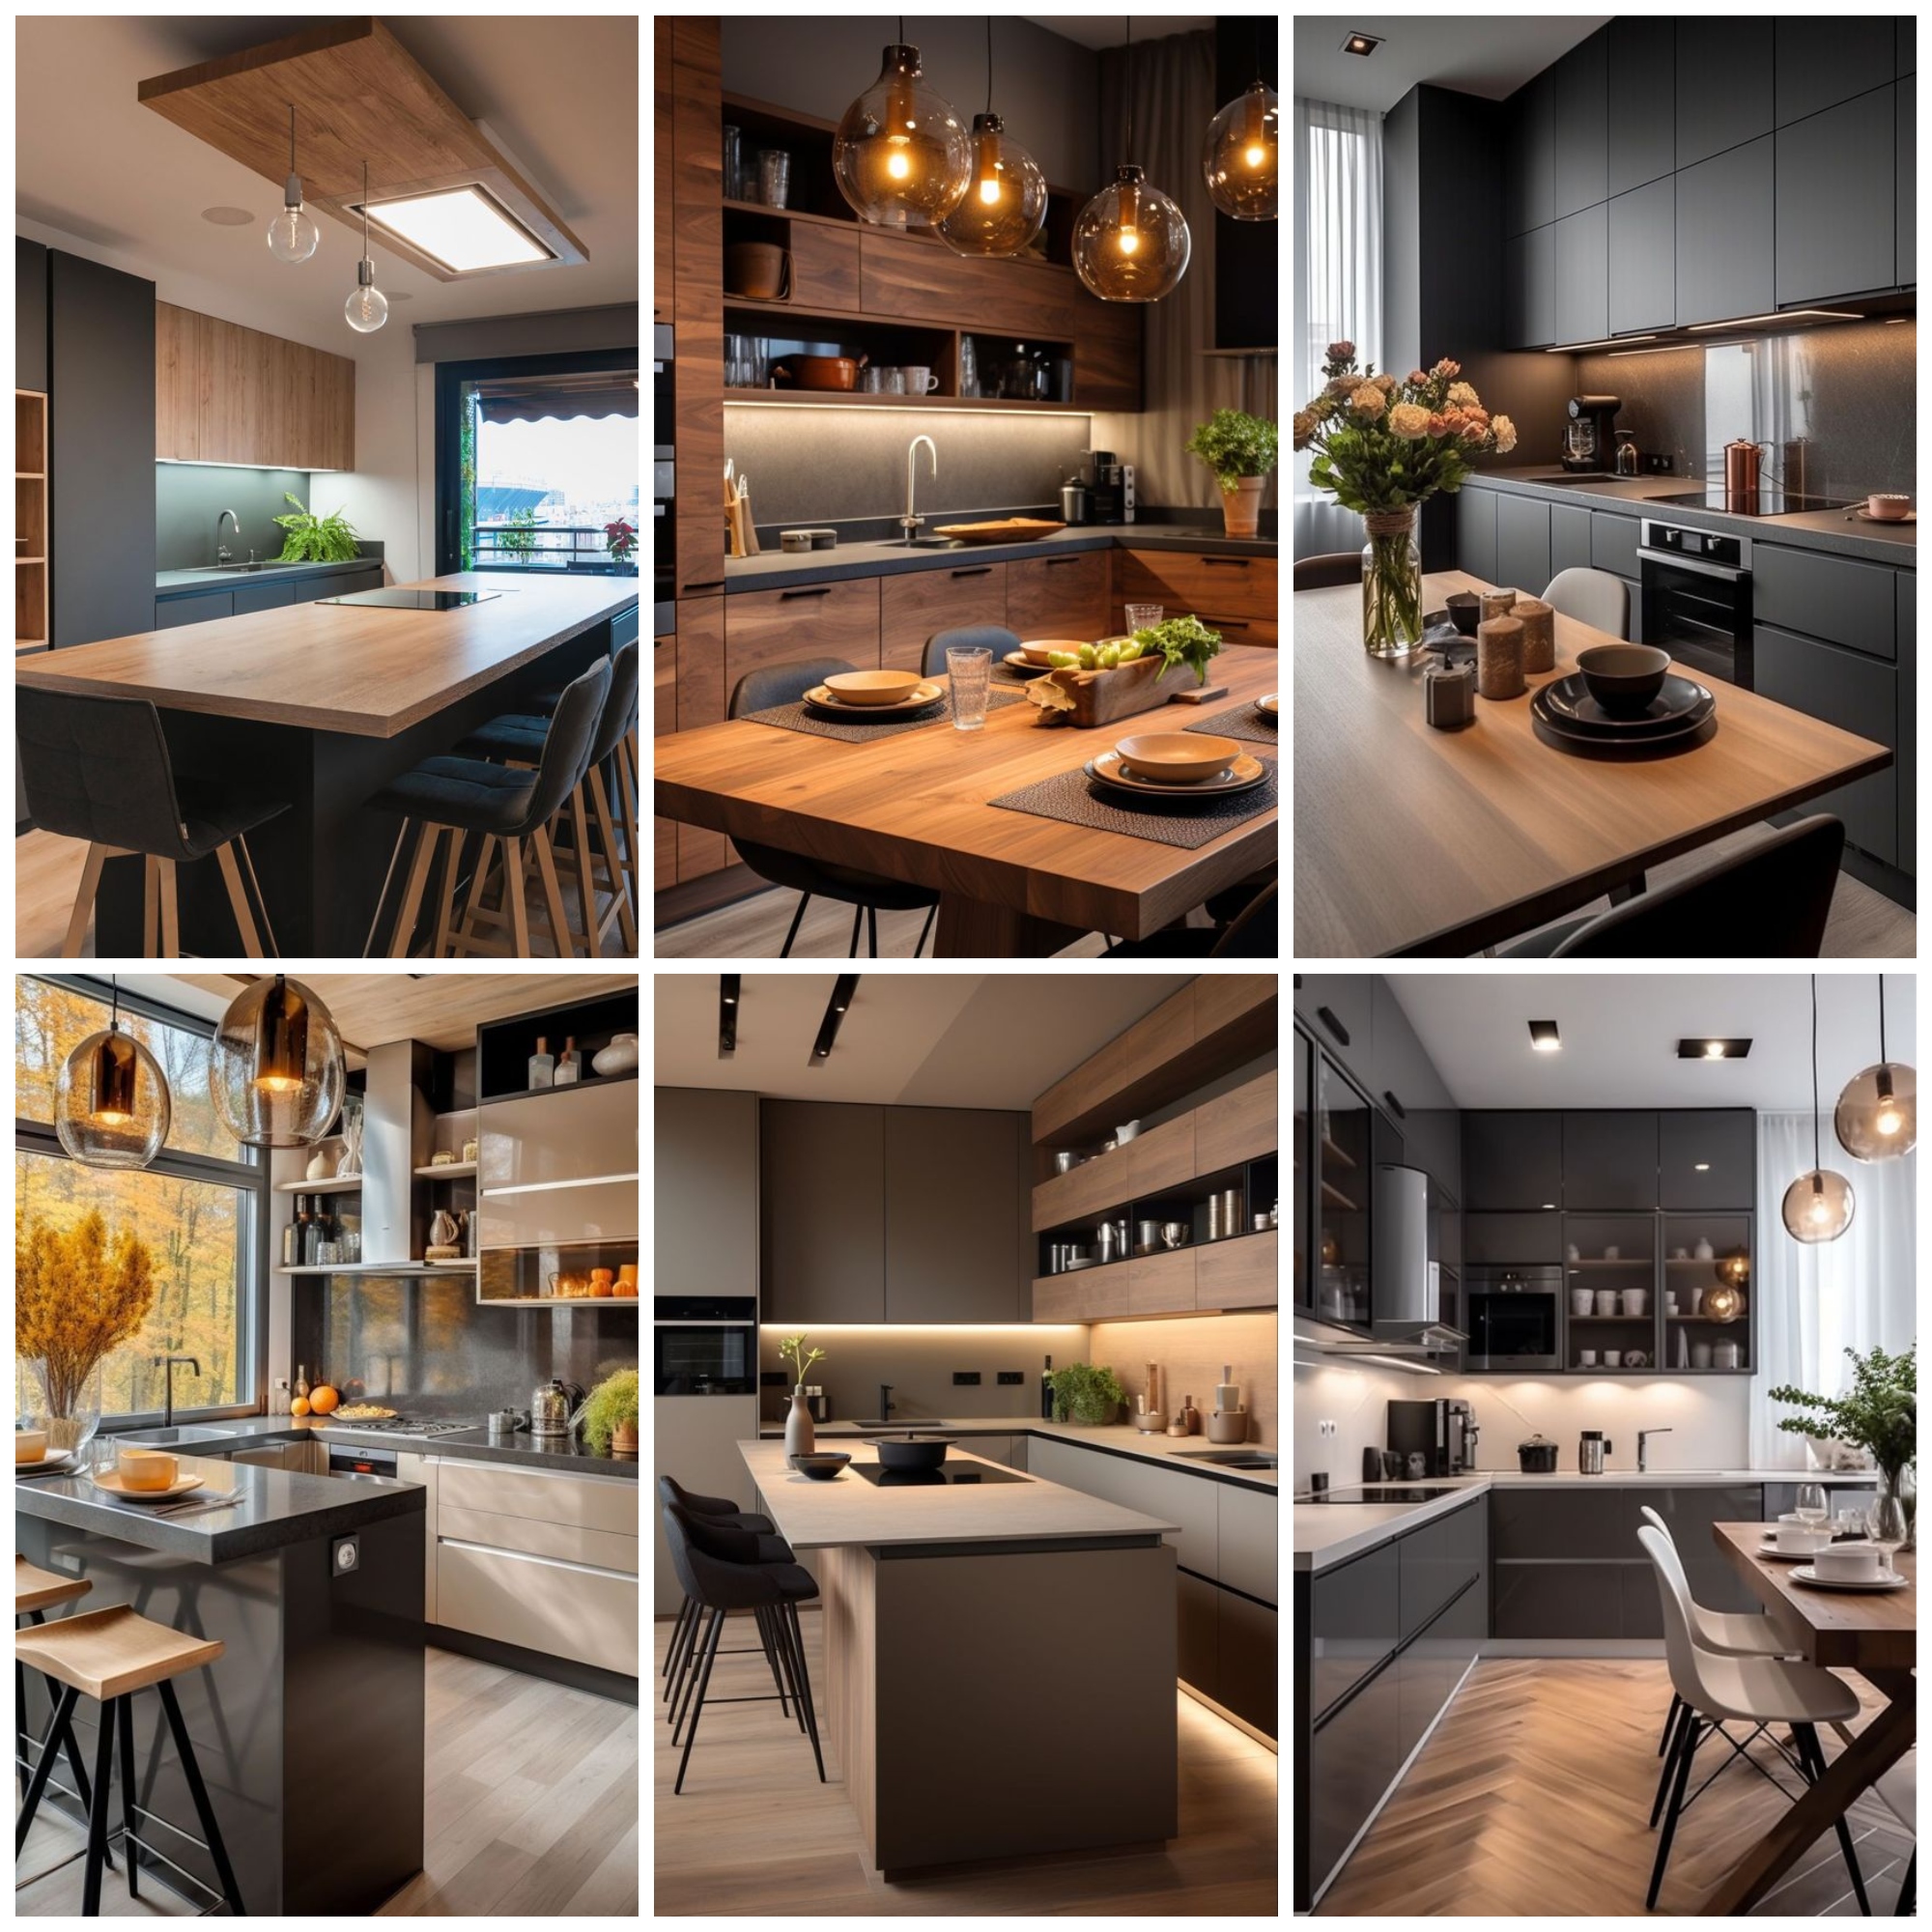 Once You Black You Can Never Go Back! Modern Black Kitchen Cabinets Ideas